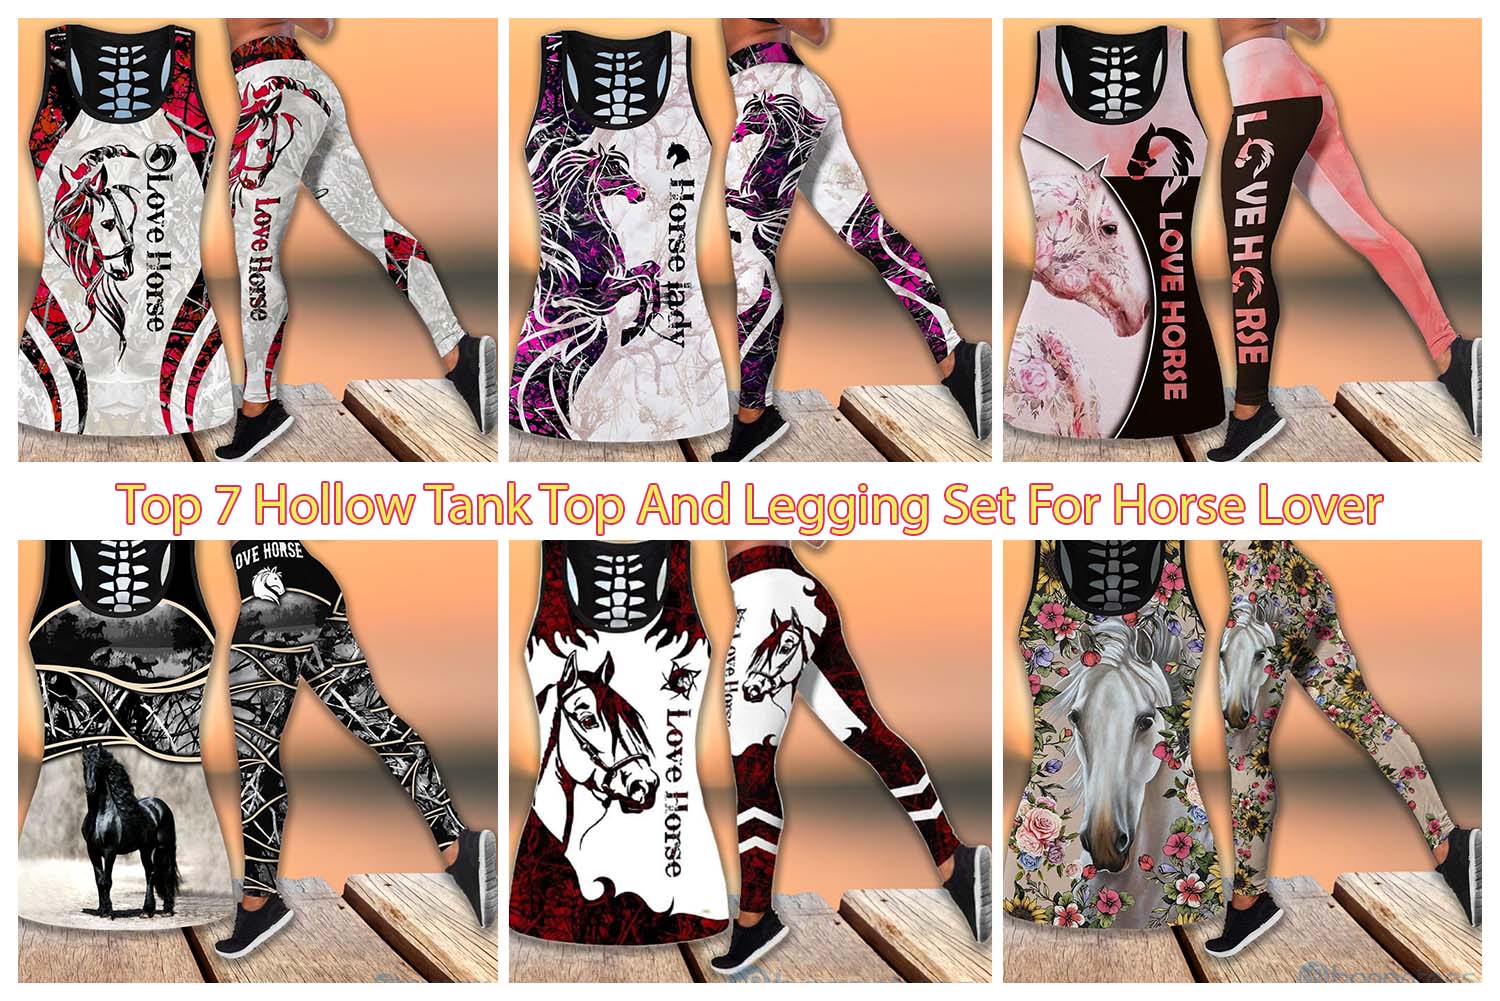 Top 7 Hollow Tank Top And Legging Set For Horse Lover